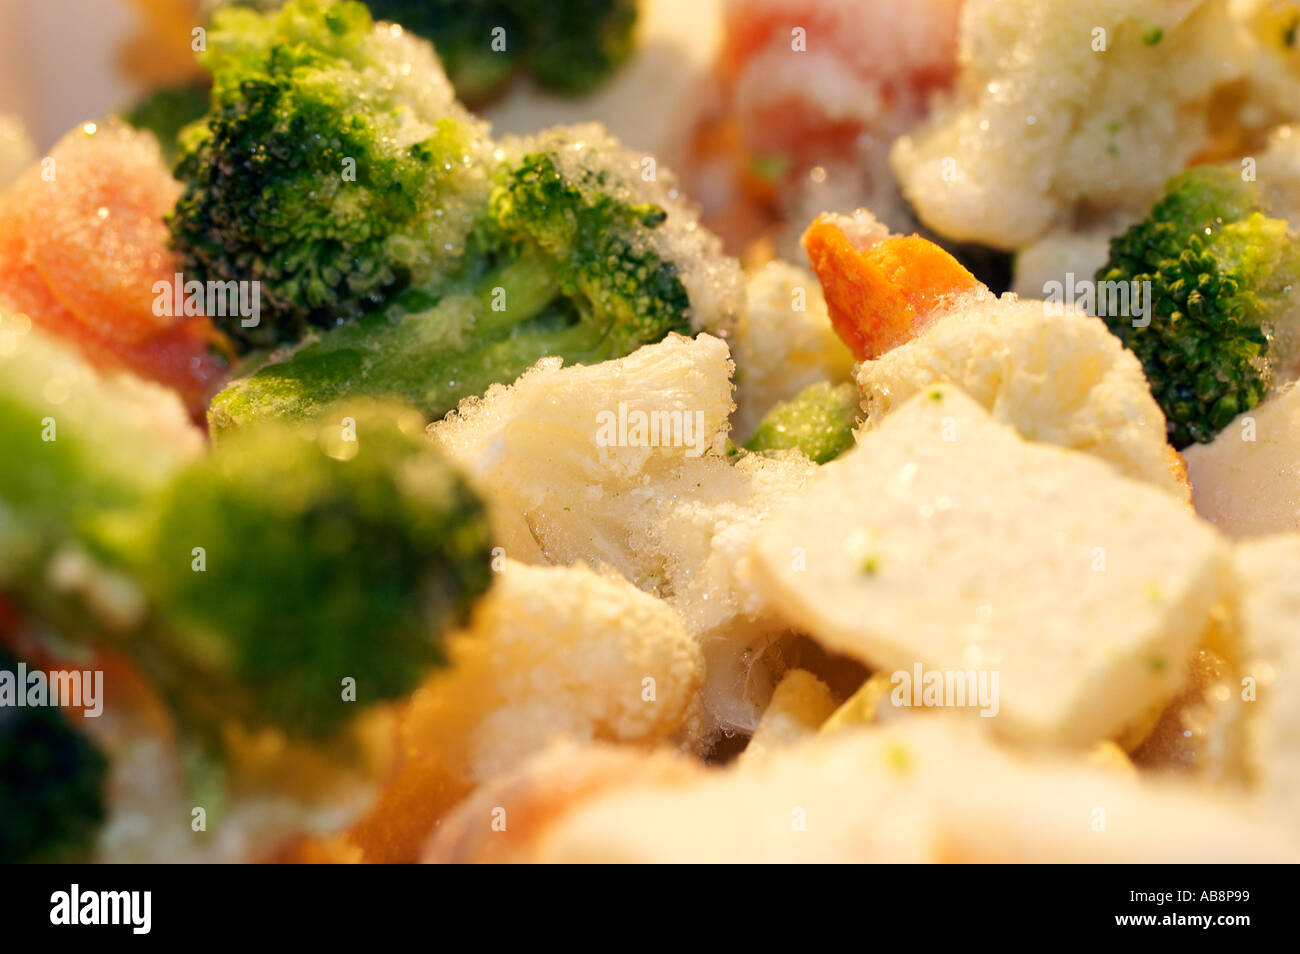 frozen finished product meal Stock Photo